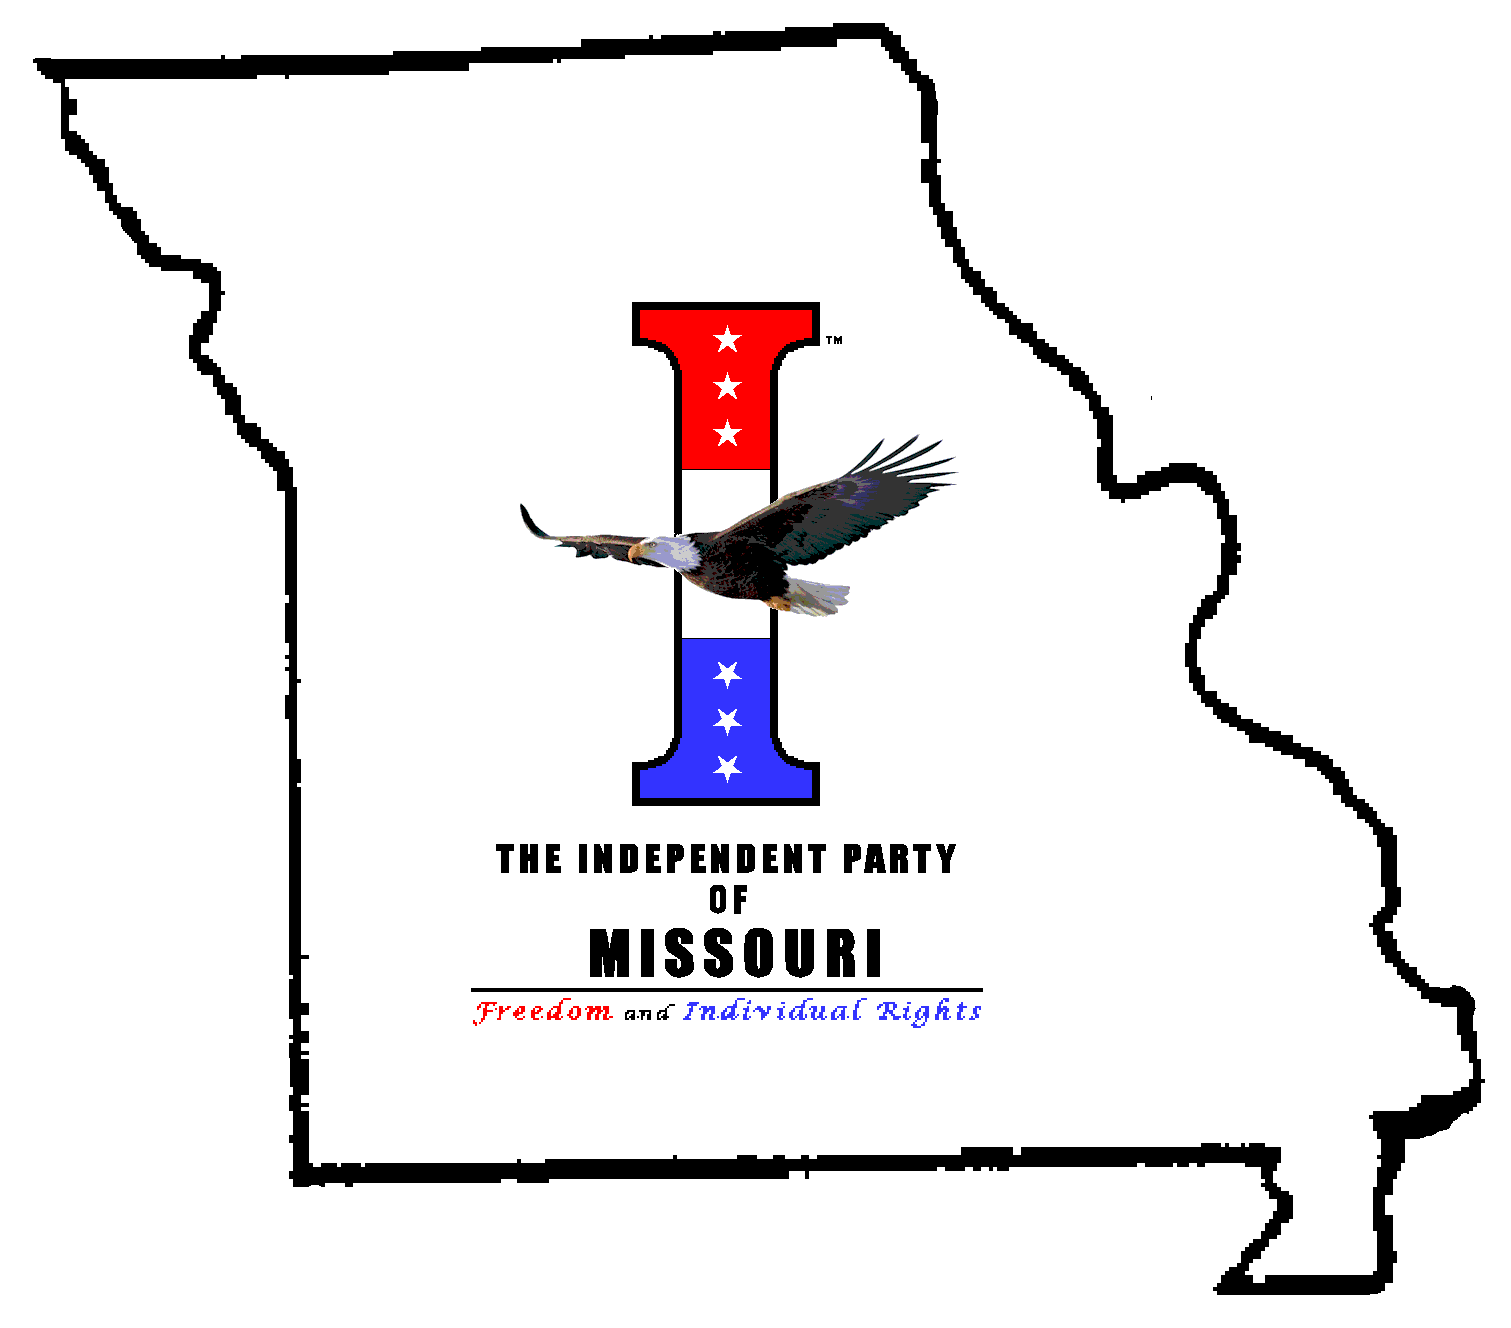 The Independent Party of Missouri!